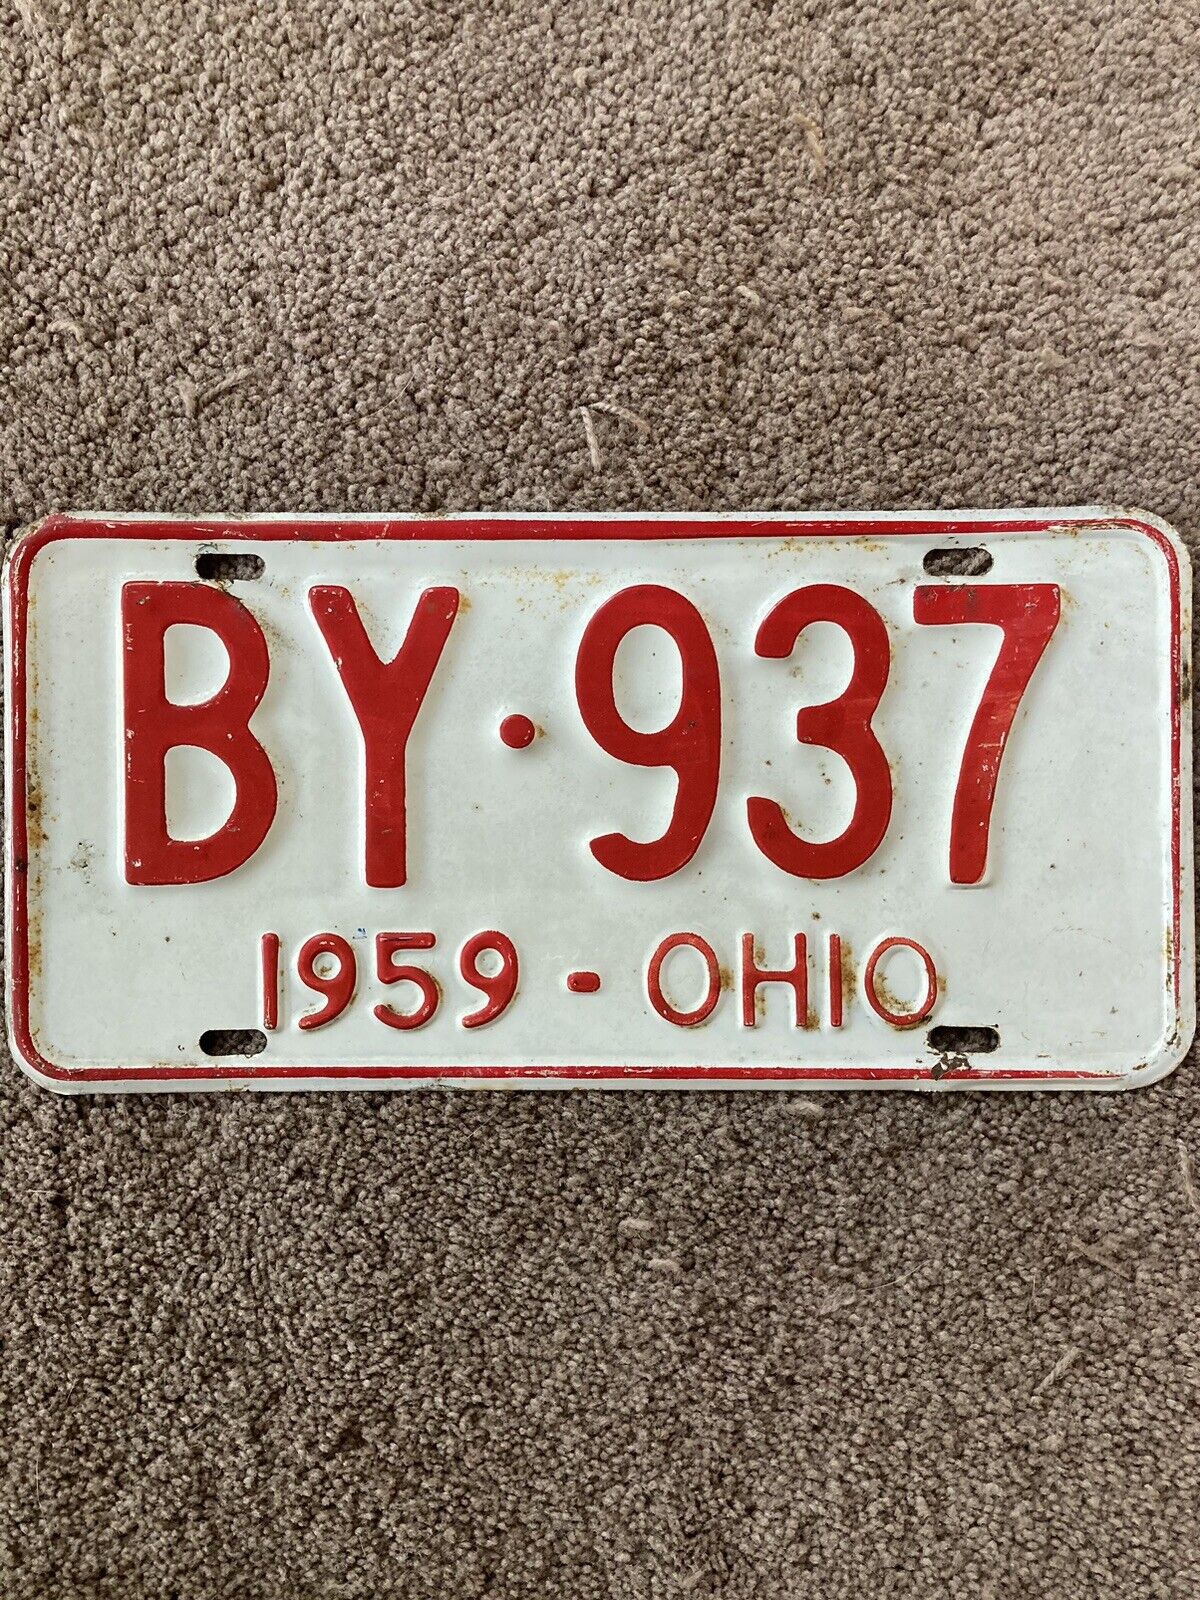 1959 Ohio License Plate - BY 937 - Very Nice